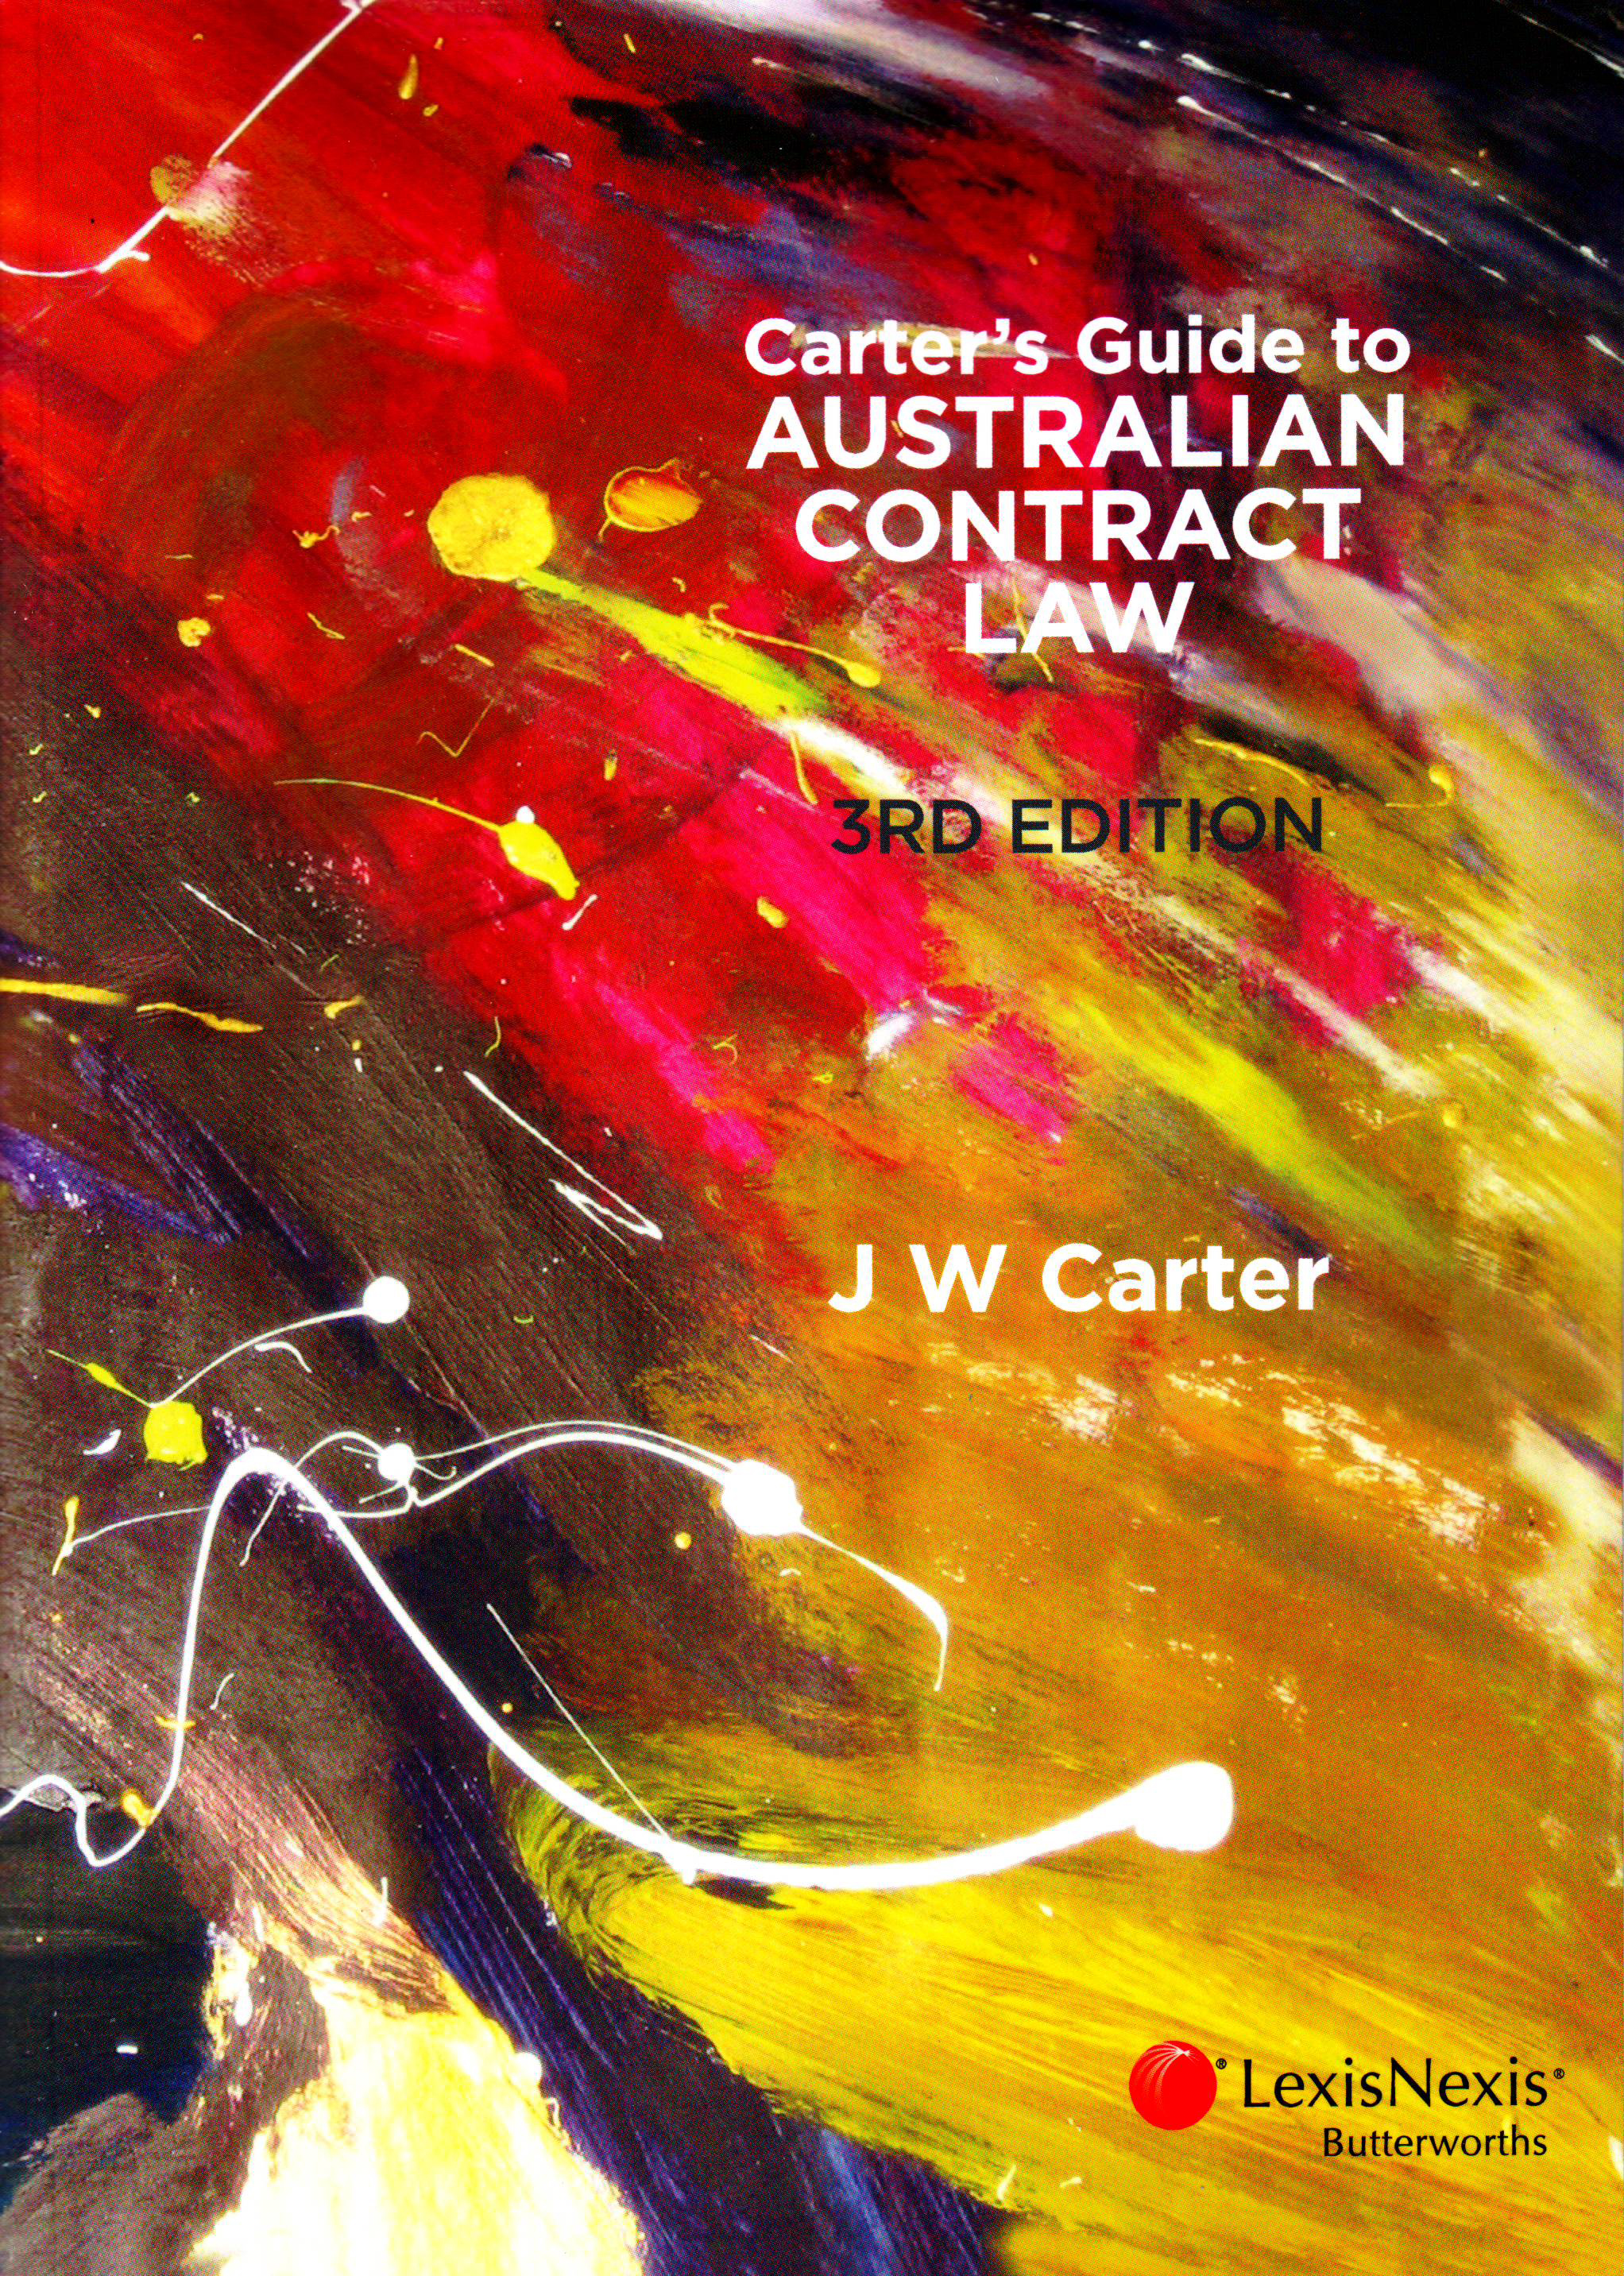 Carter’s Guide to Australian Contract Law e3